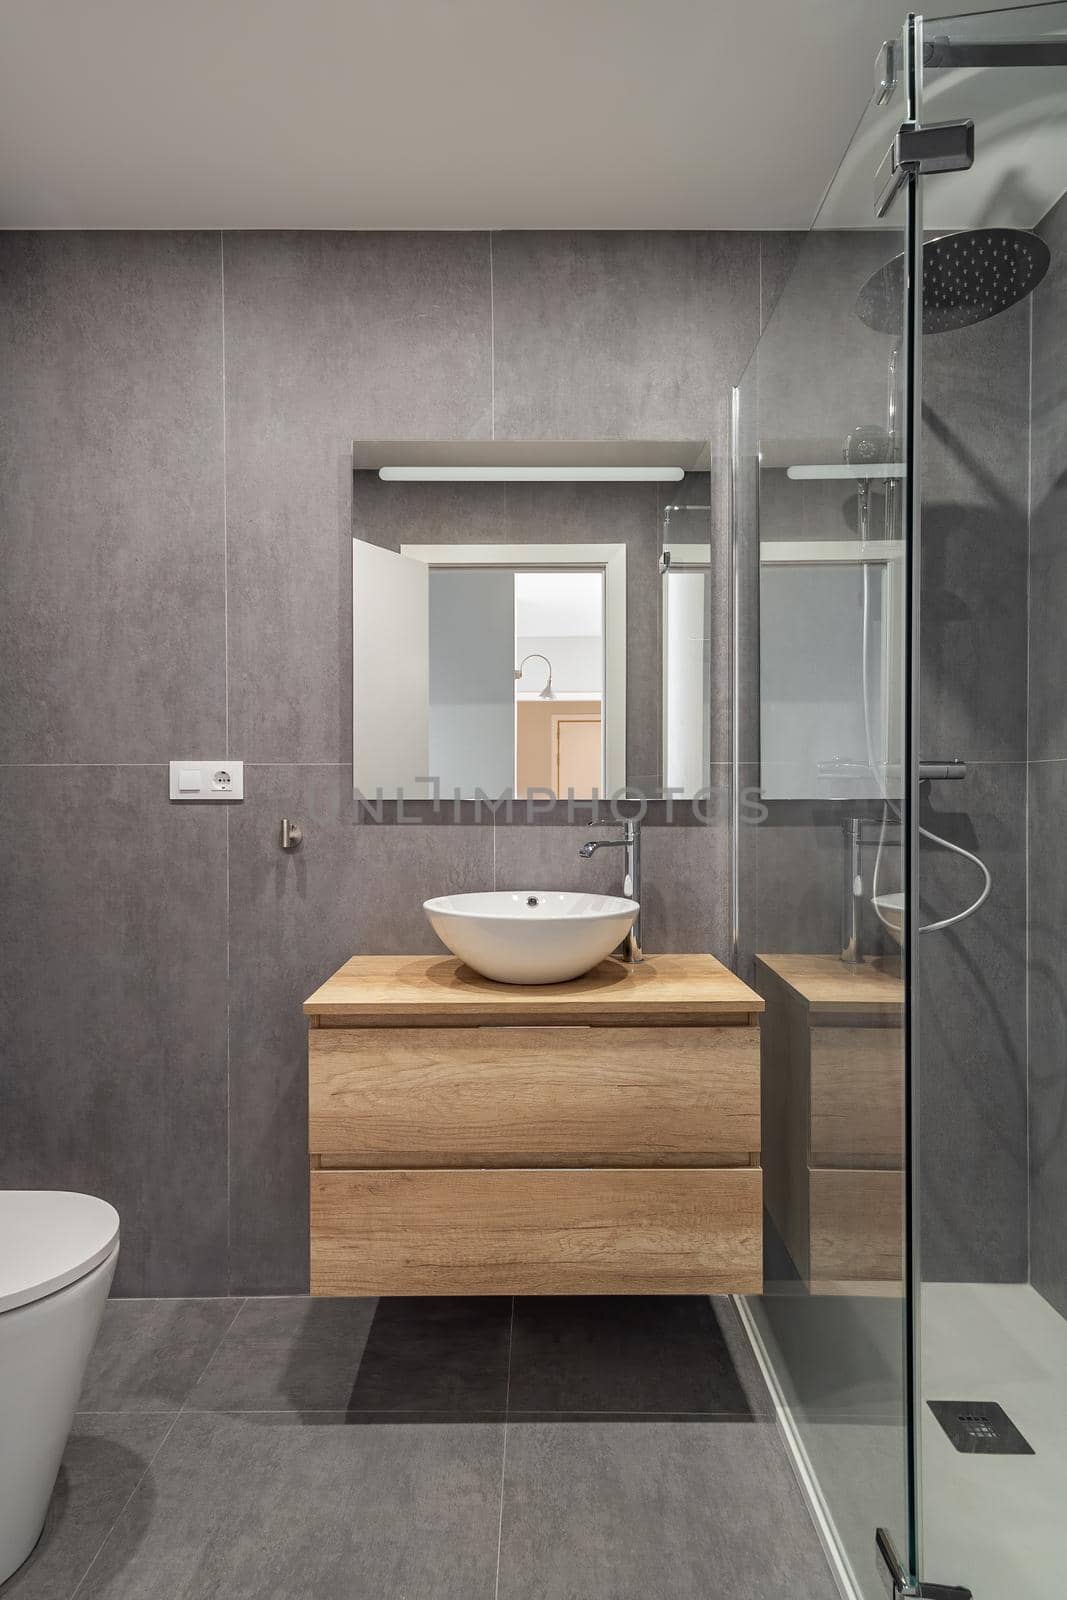 Modern refurbished bathroom in minimalistic style with sink mirror and shower cabin.